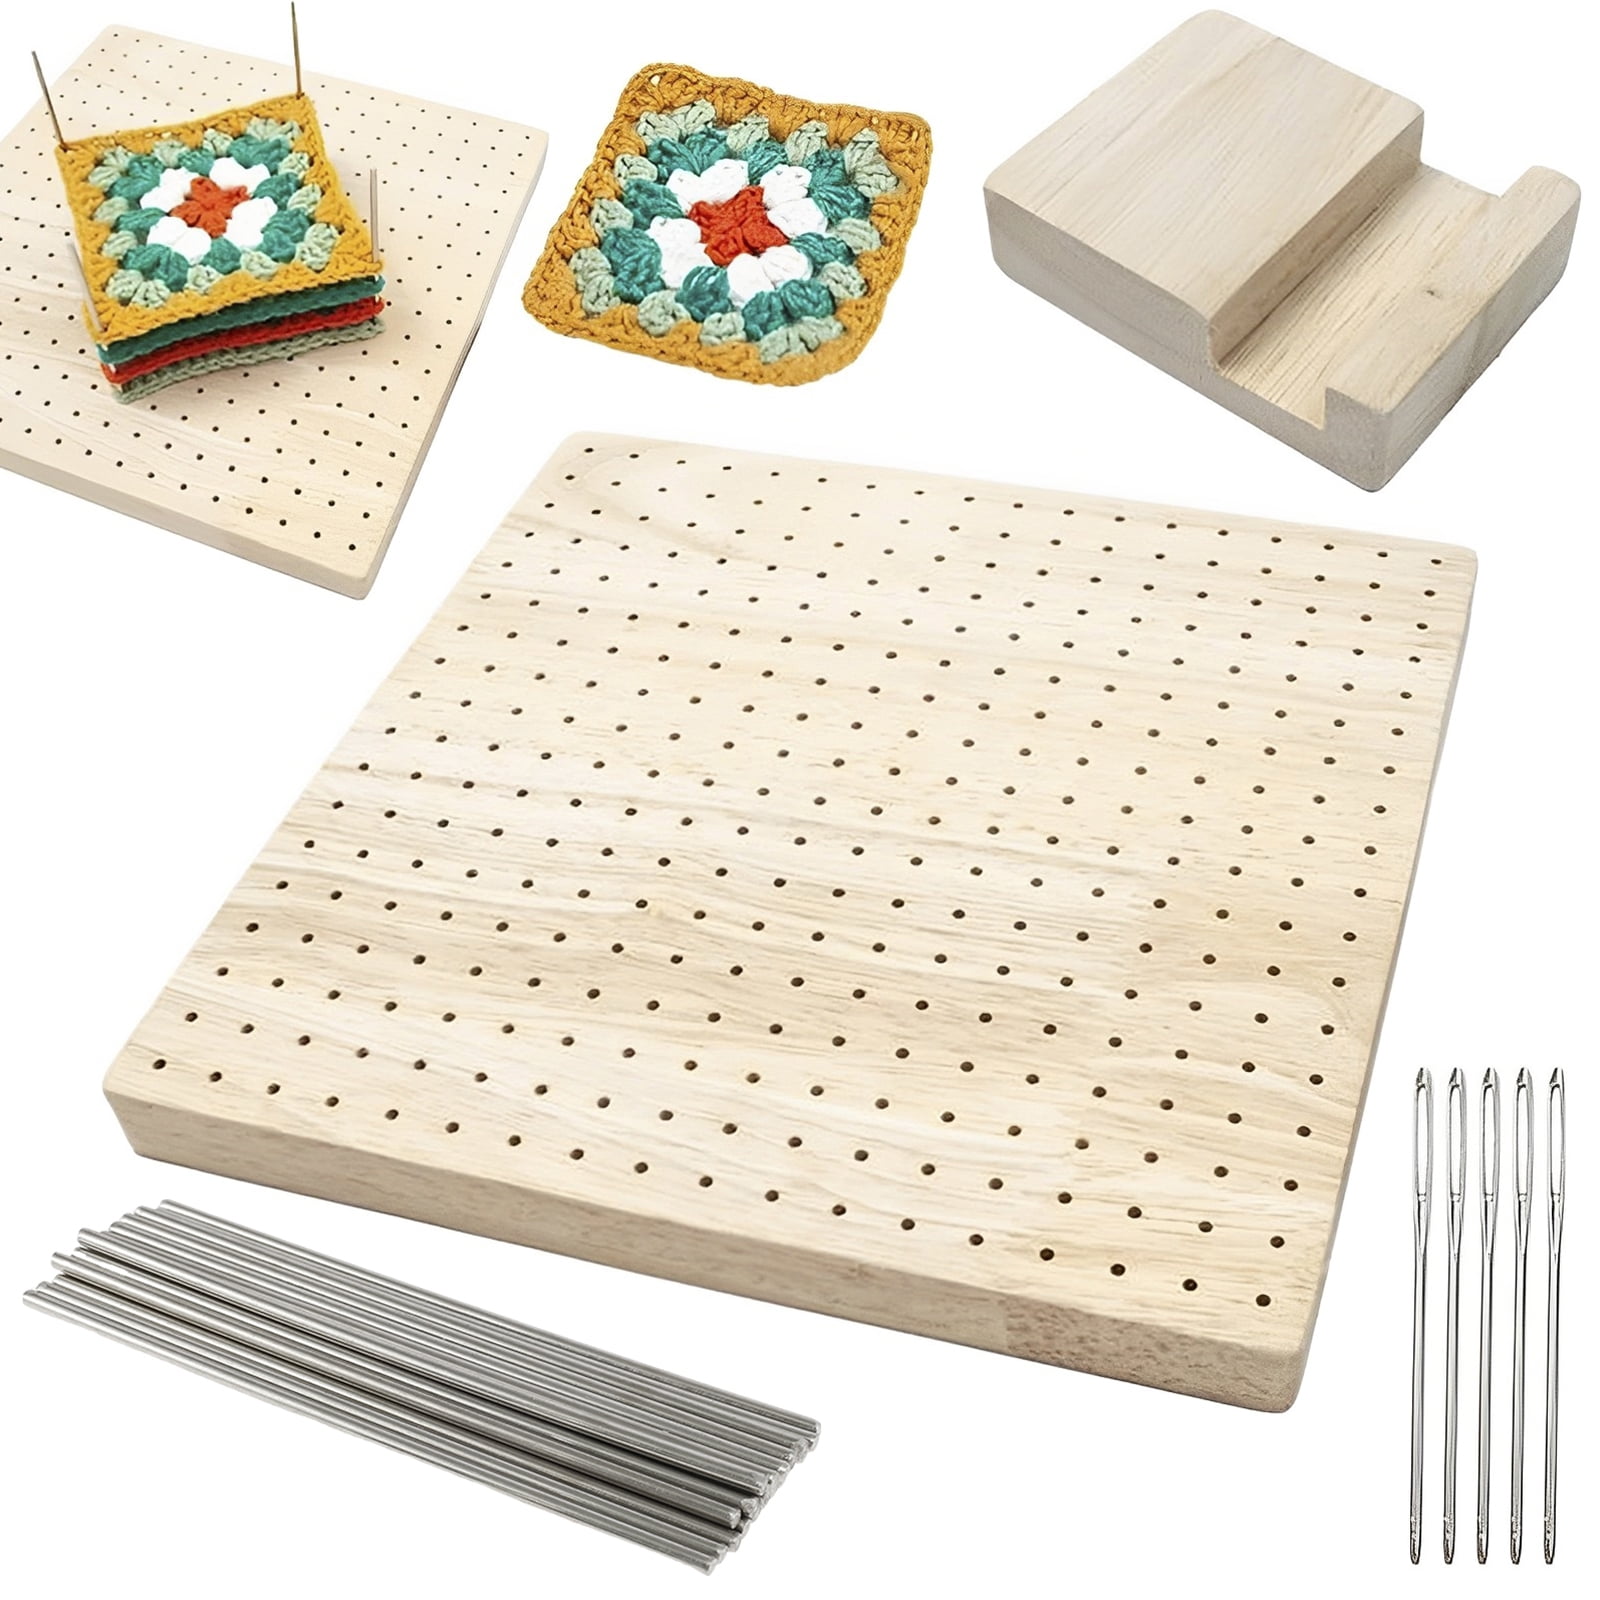 Wooden Blocking Board Granny Crochet Board Crafting Accessories with Small Holes for Setting Sewing Knitting Artwork 31.5cmx31.5cm, Brown